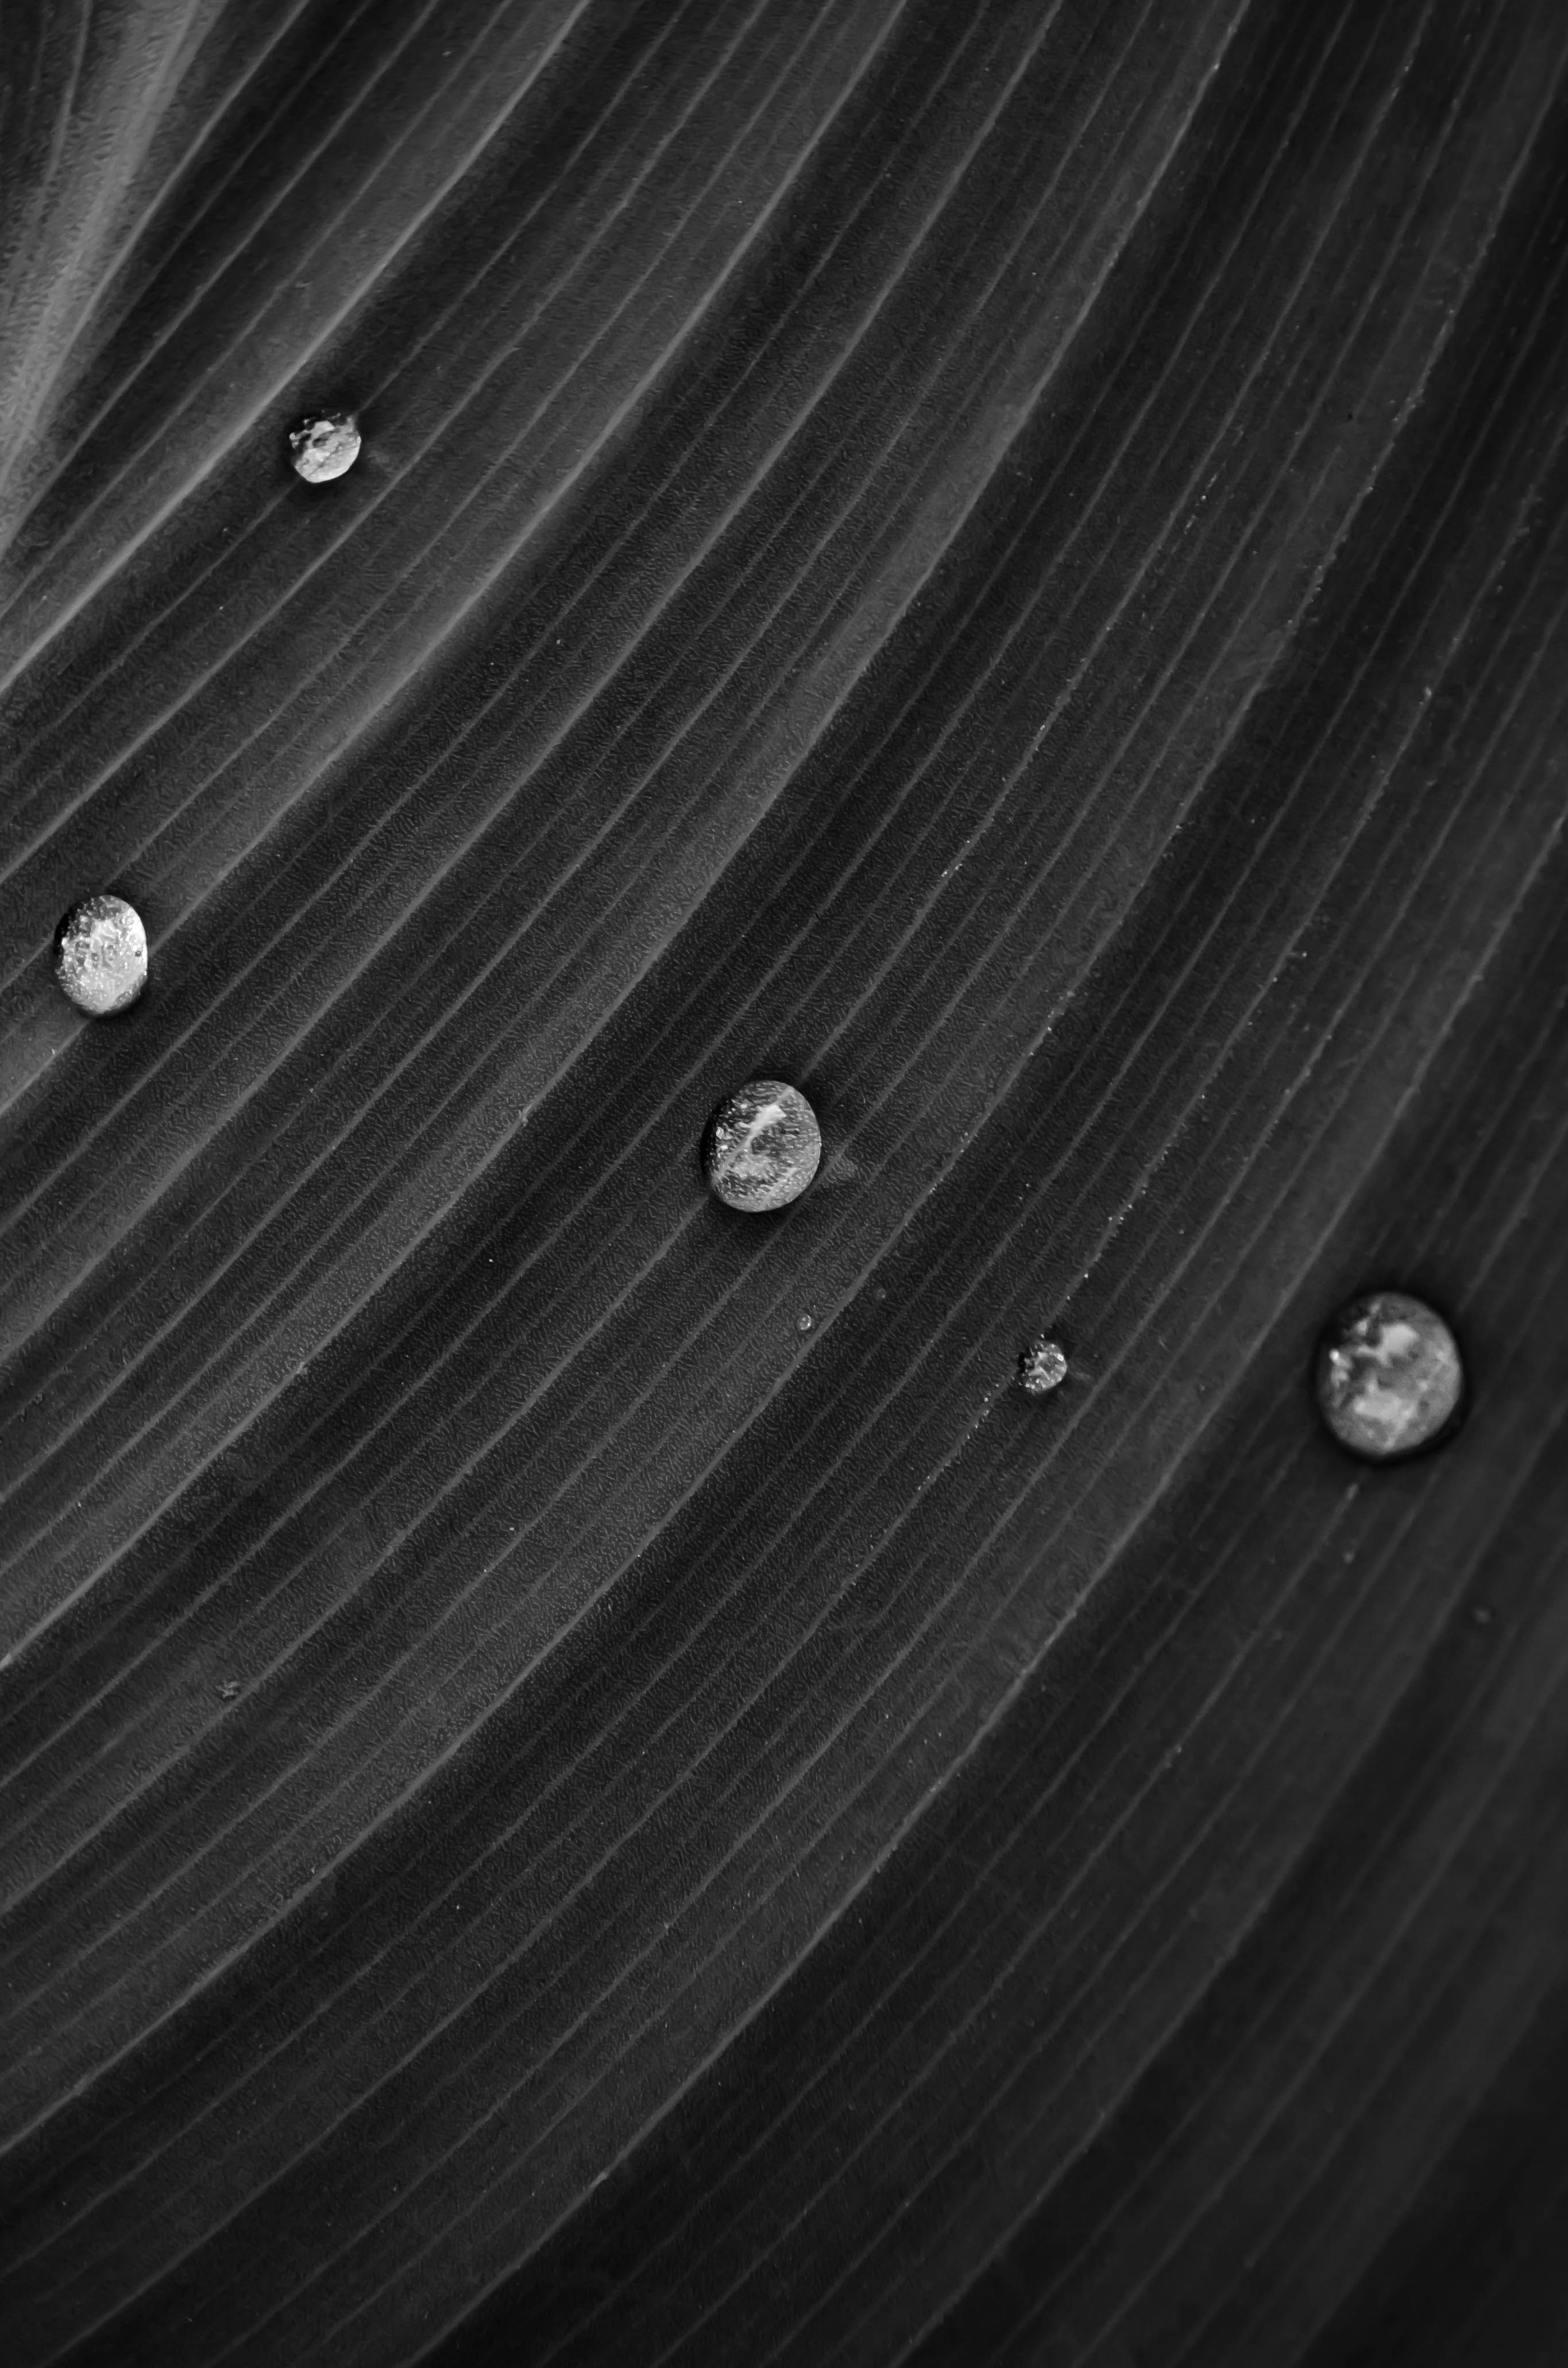 Download wallpaper 2730x4122 drops, leaf, bw, water hd background